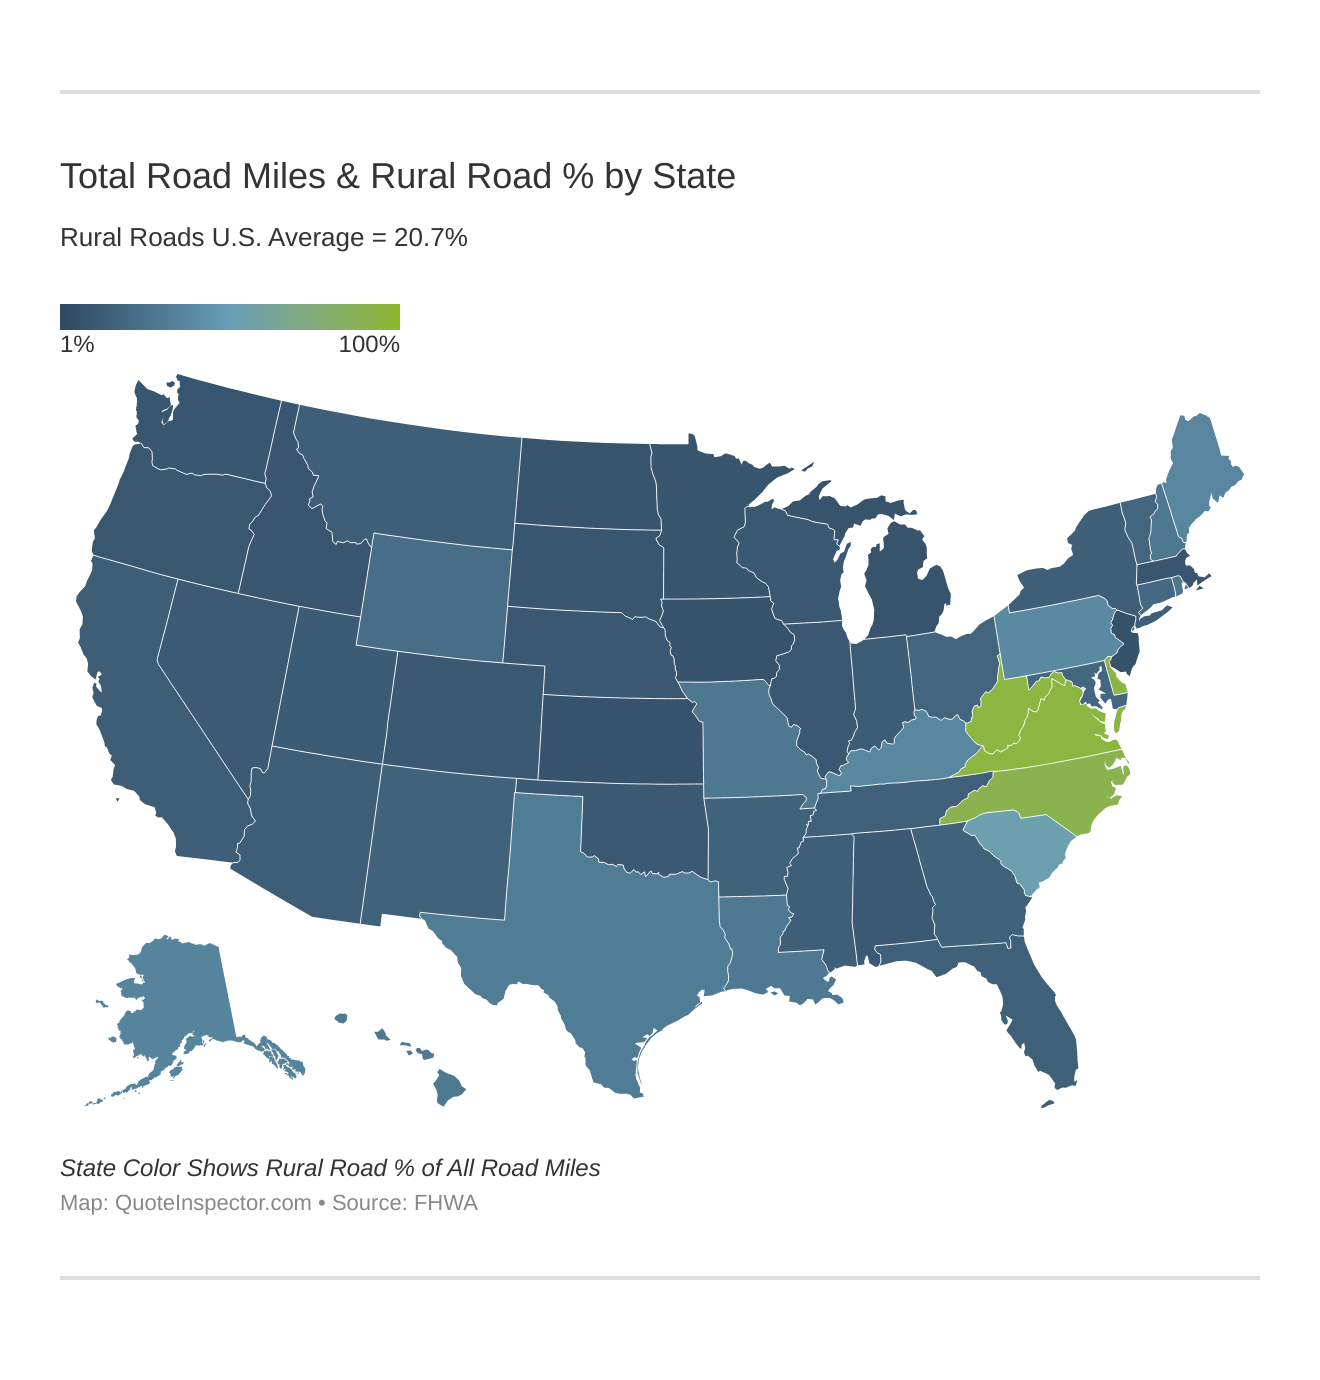 Total Road Miles & Rural Road % by State